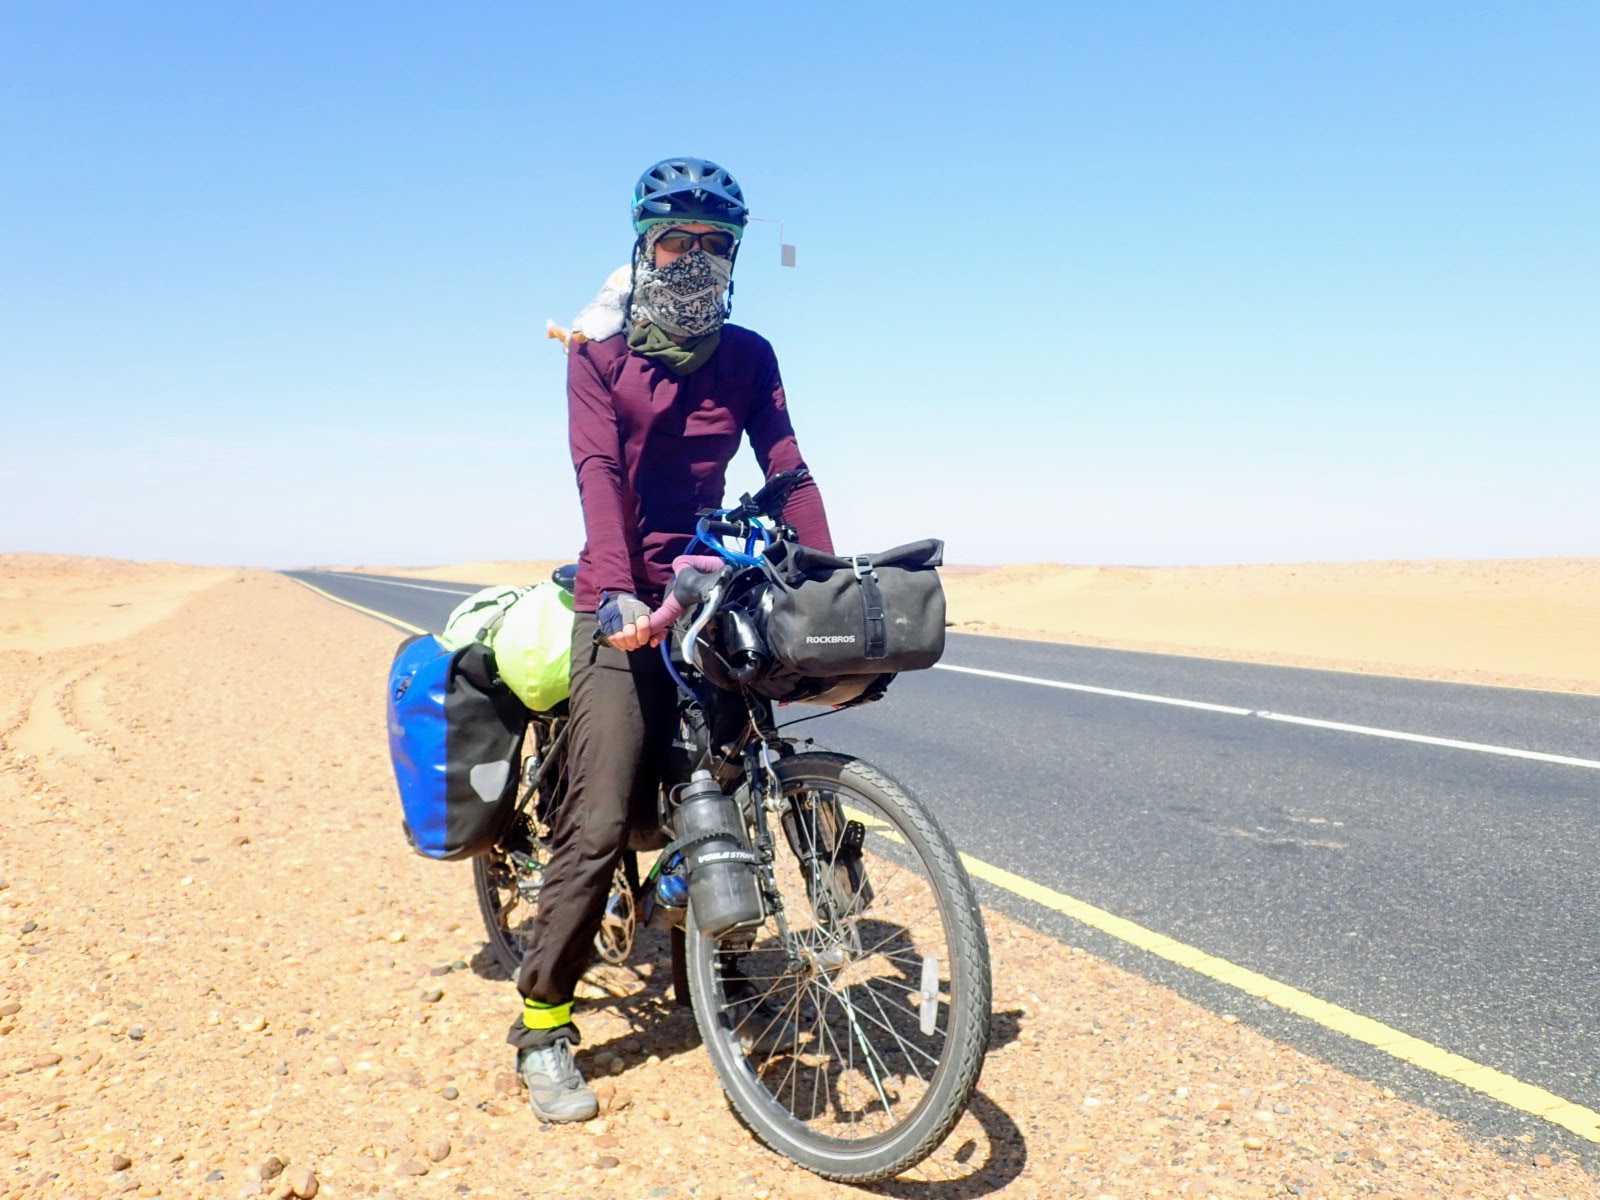 Cycling solo as a woman in Sudan